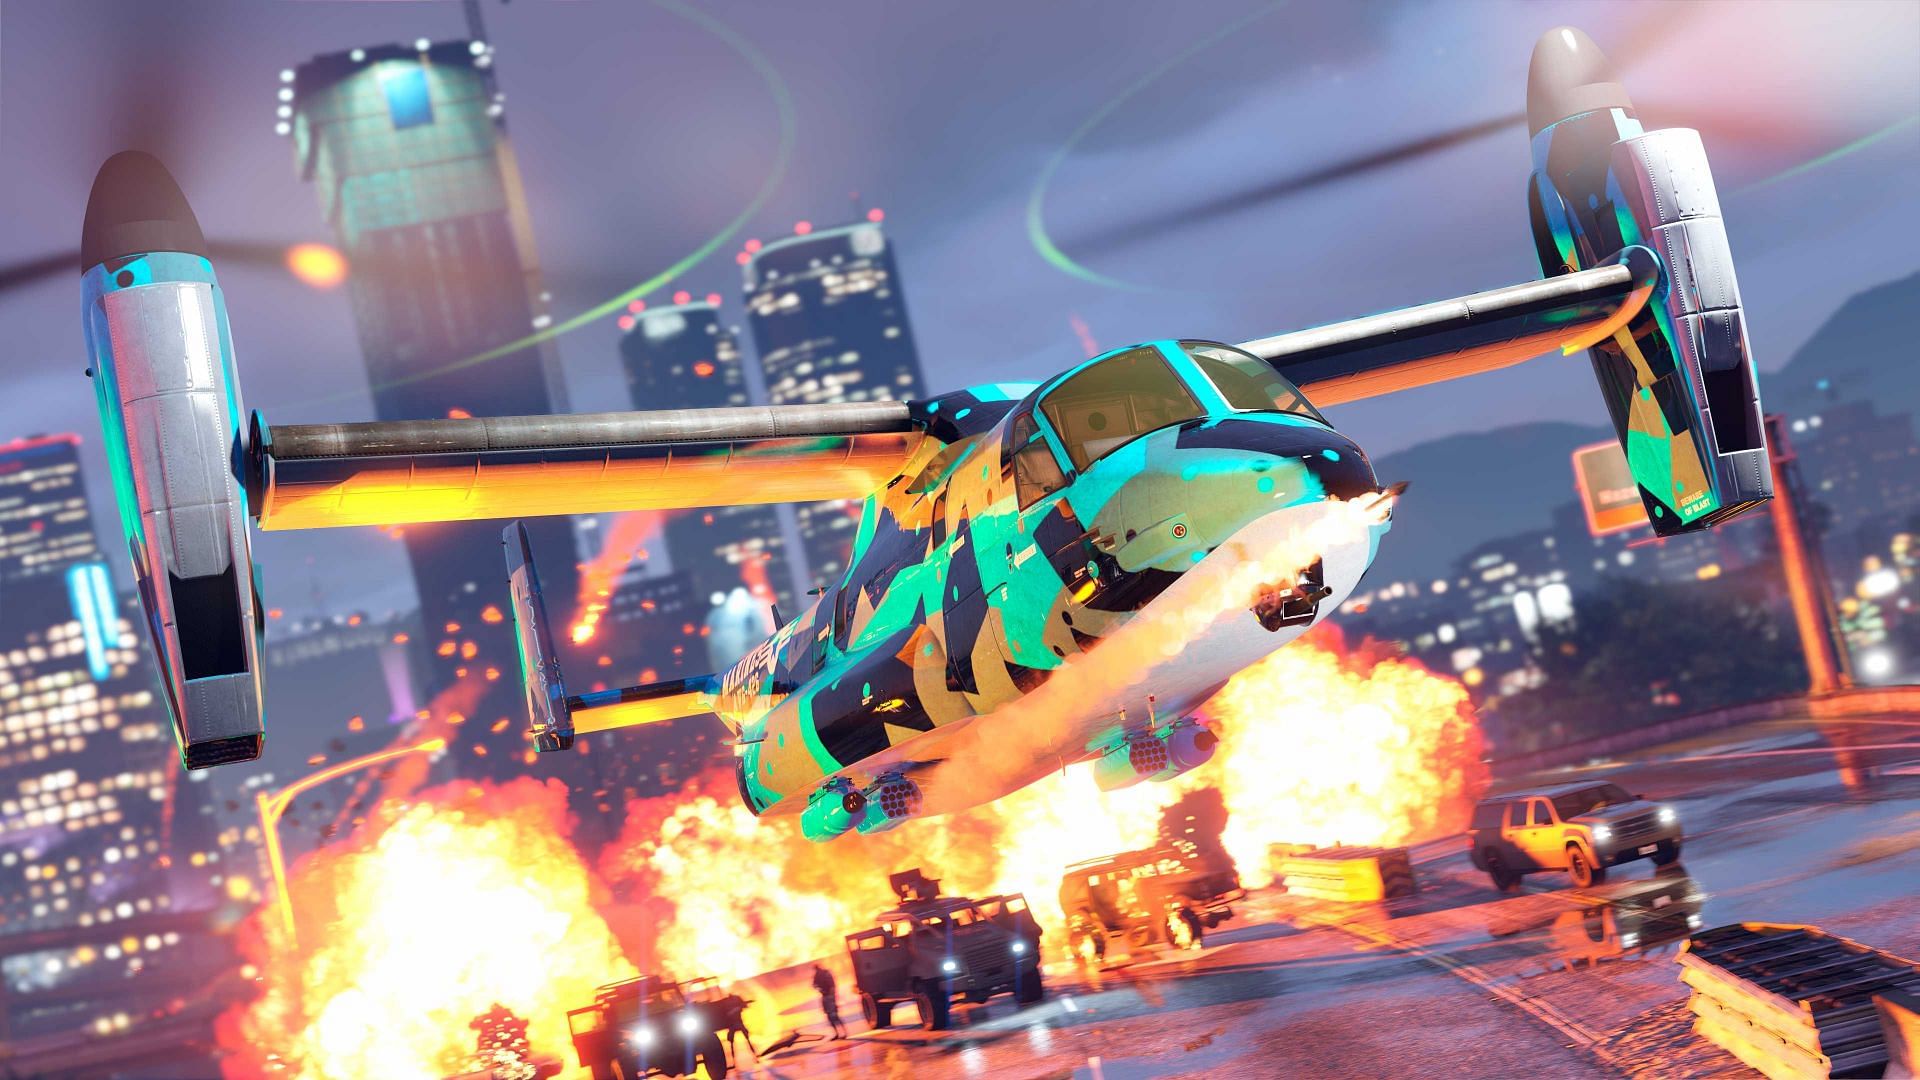 Mammoth Avenger is a weaponized plane (Image via Rockstar Games)